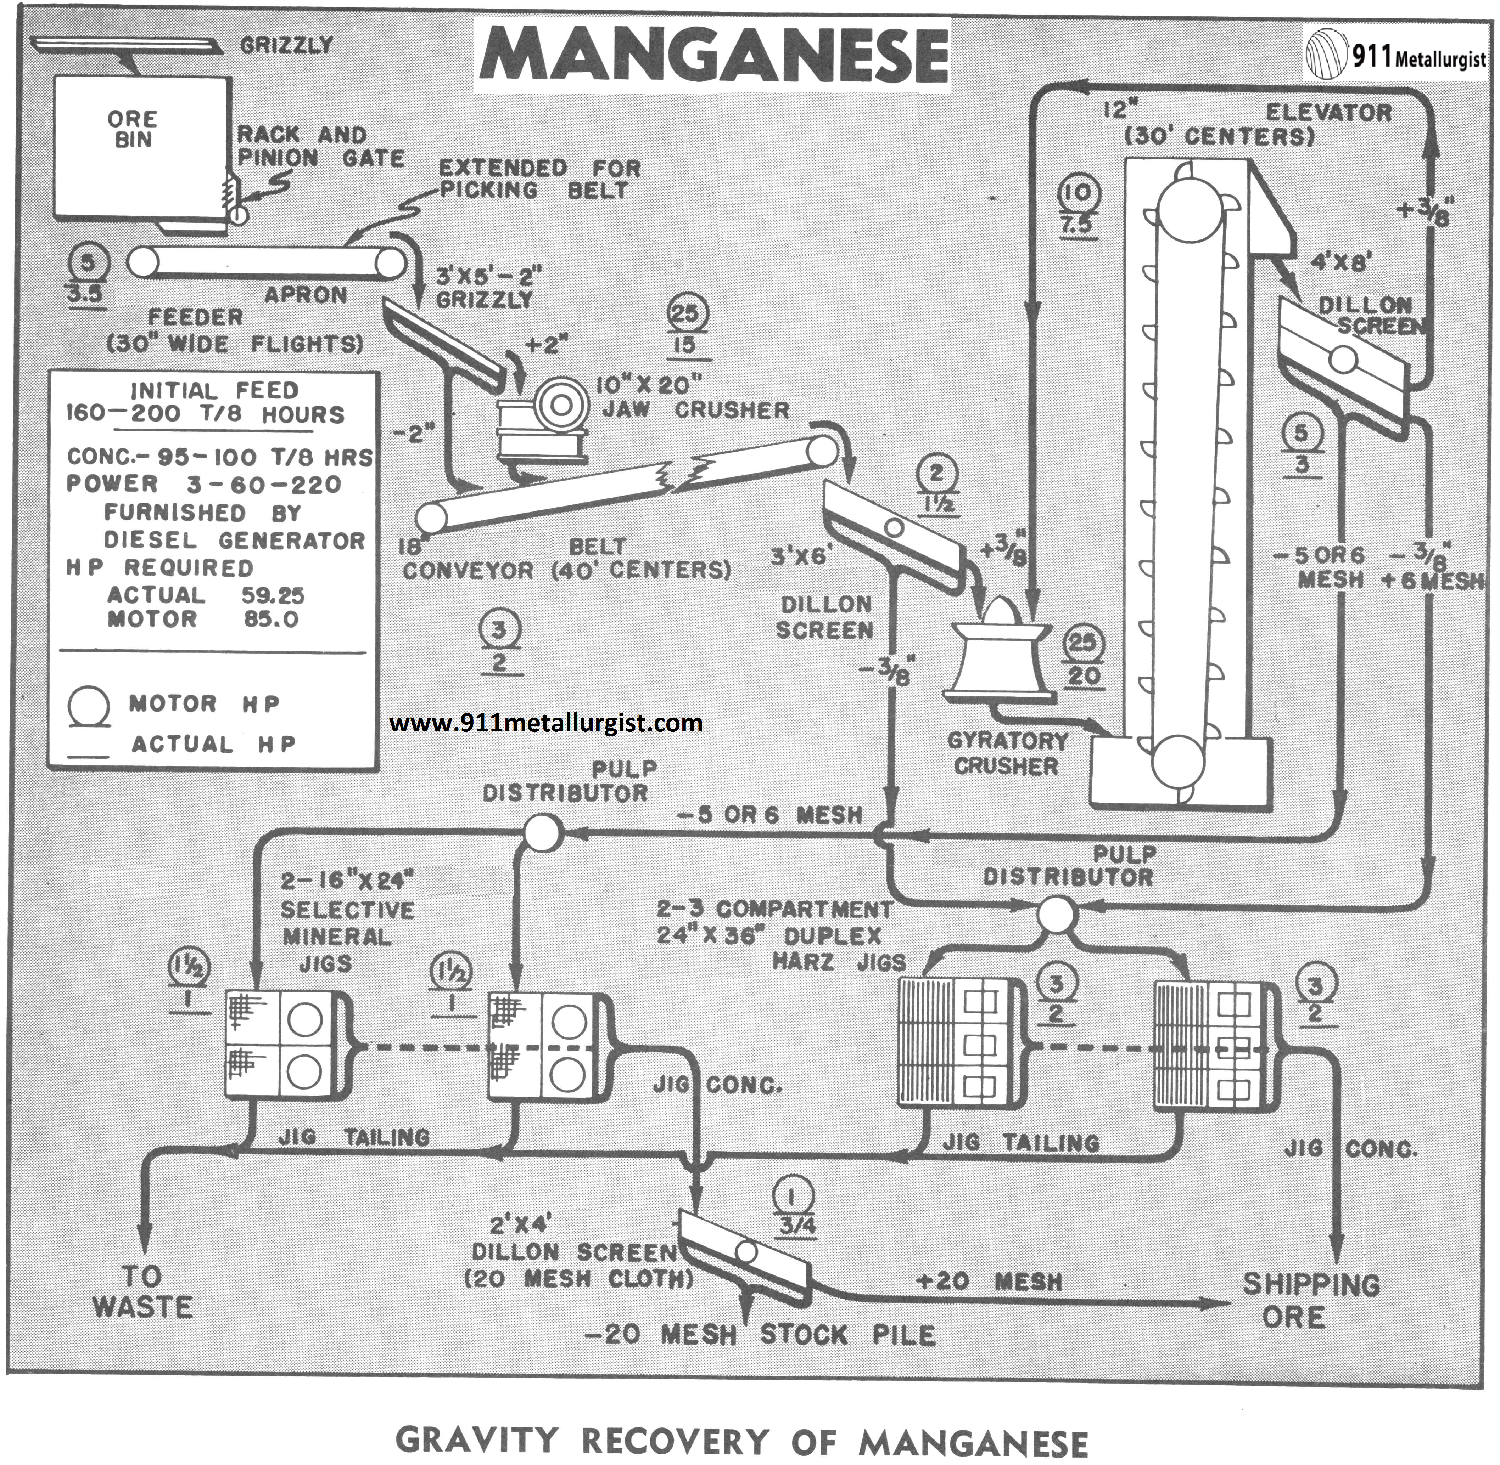 Gravity Recovery of Manganese